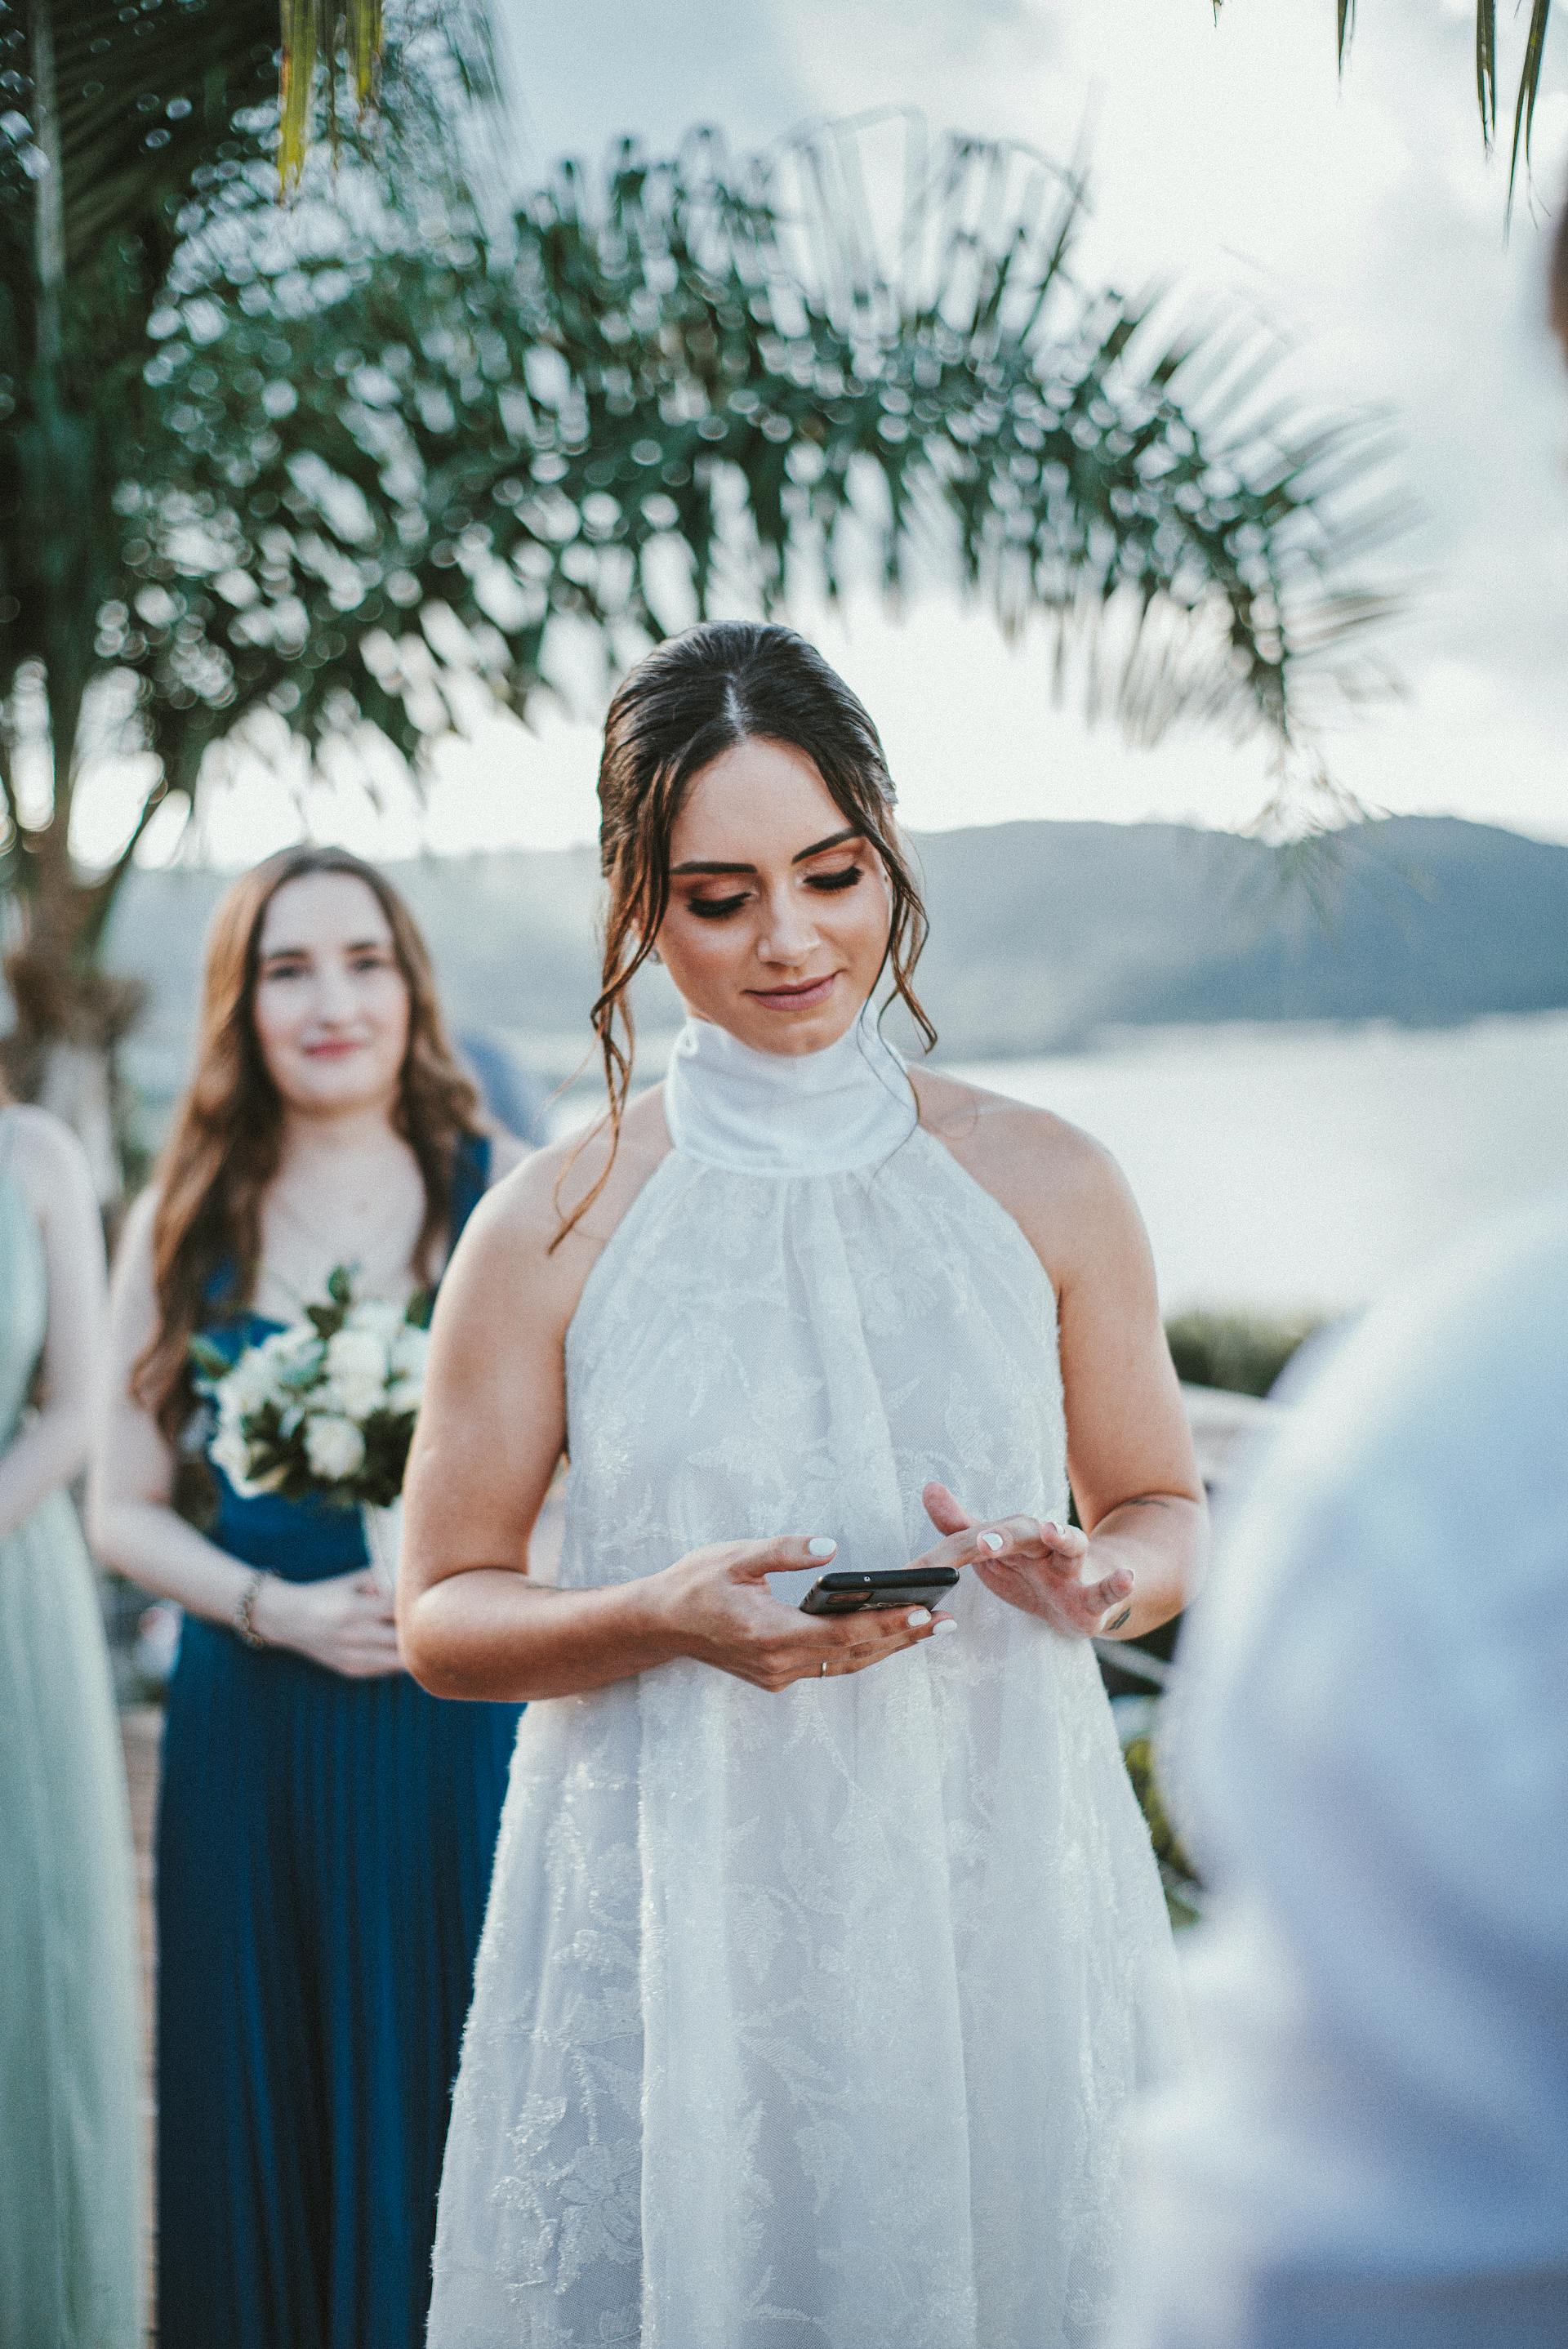 A bride checking her phone | Source: Pexels